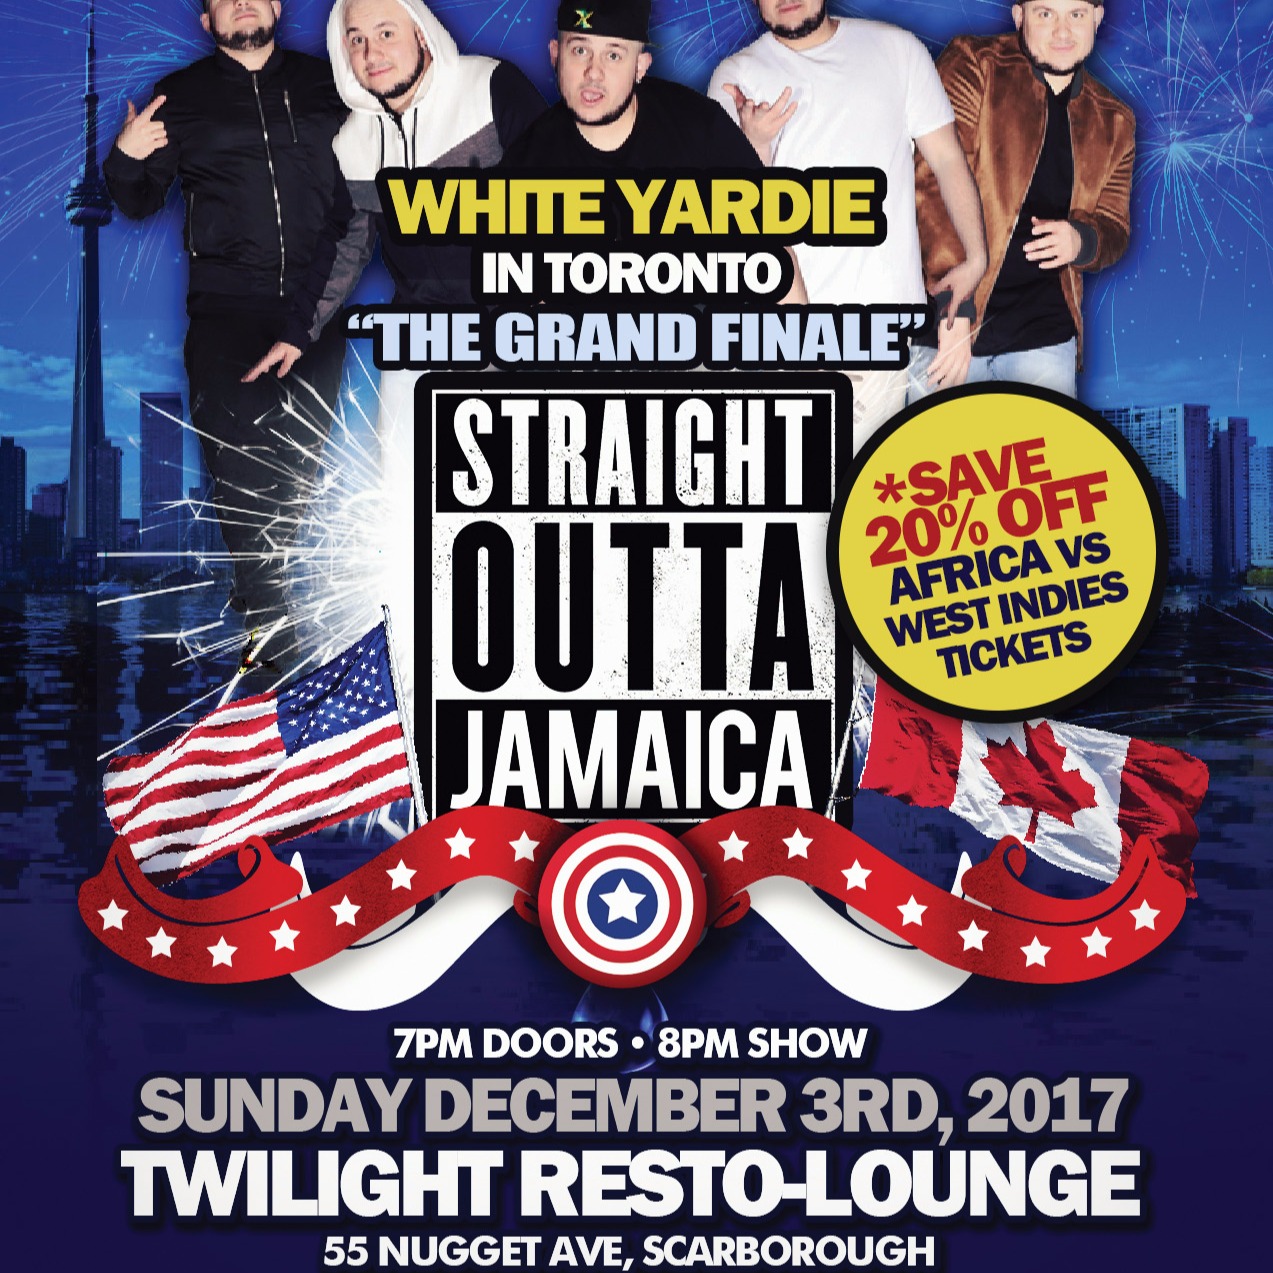 White Yardie & Juice Comedy Present Straight Outta Jamaica Tour - Toronto - The Grand Finale